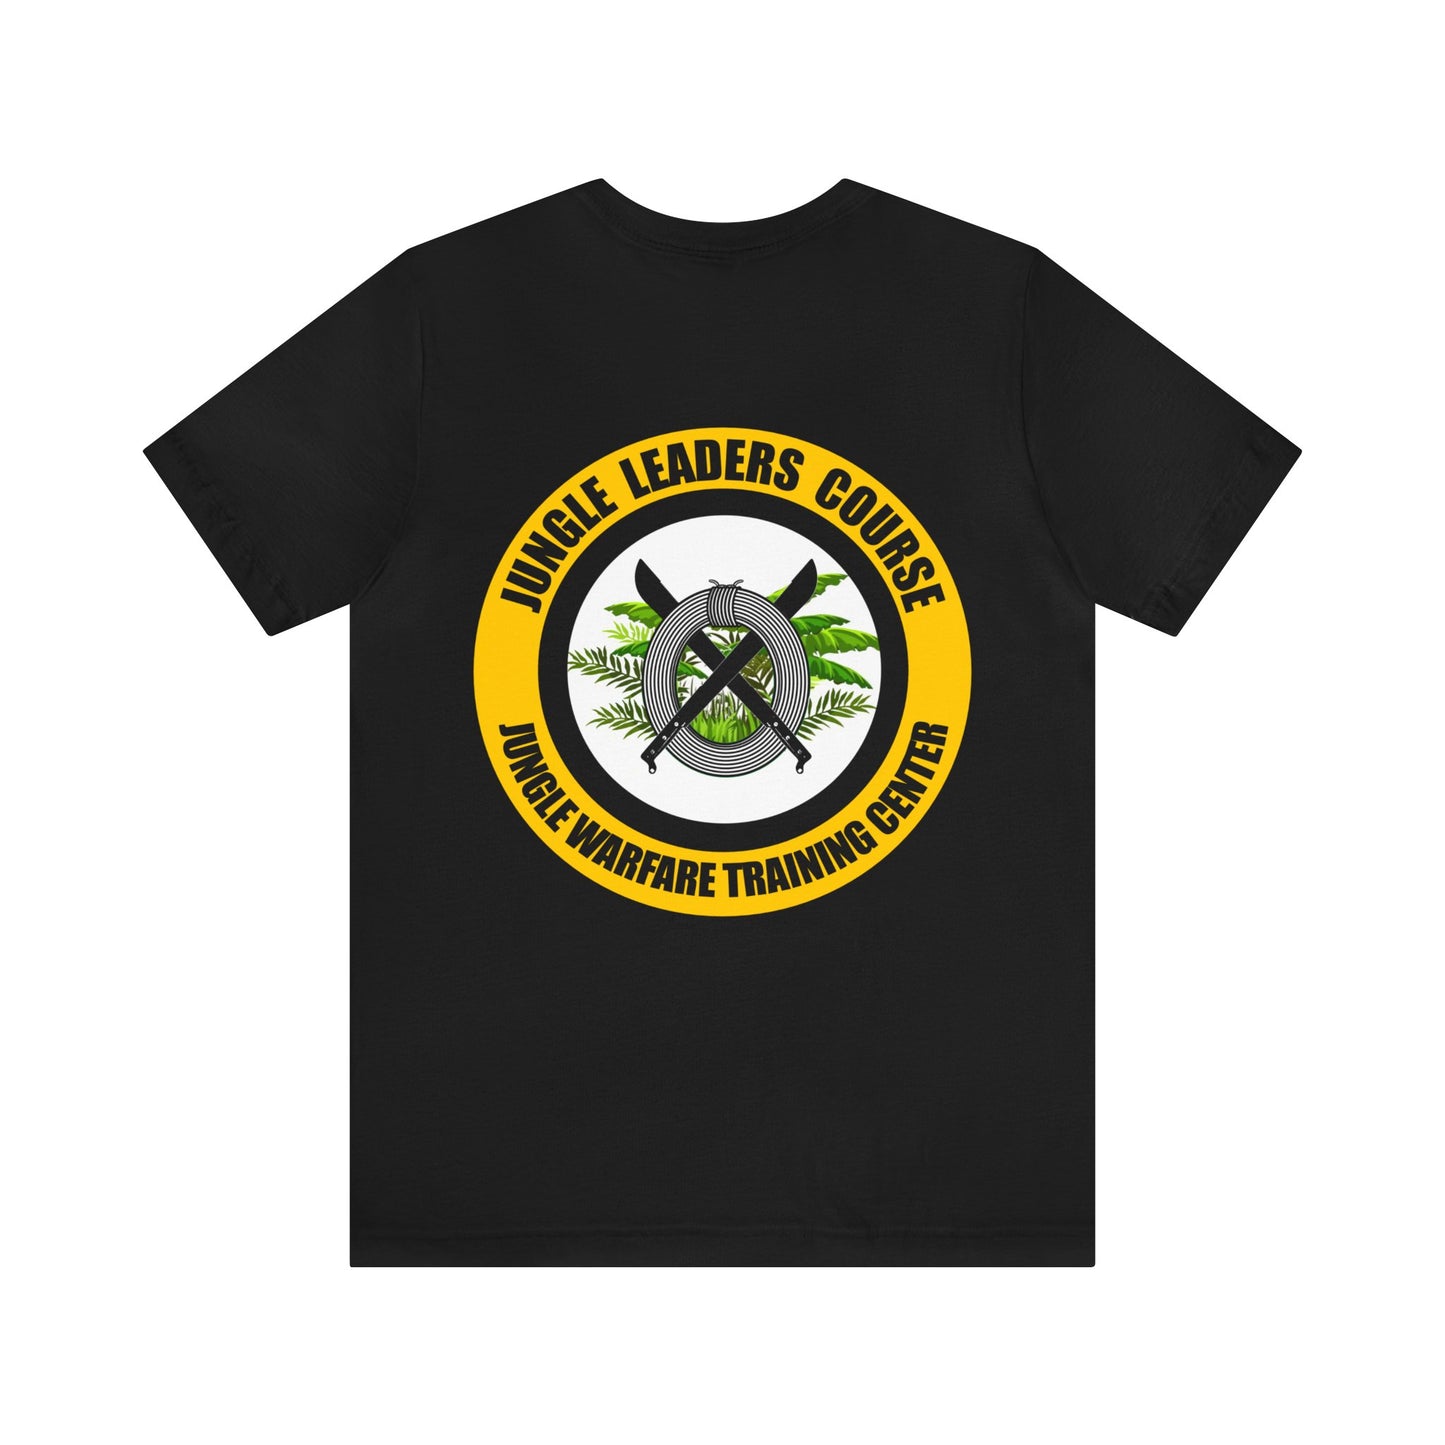 Jungle Leaders Course T-Shirt